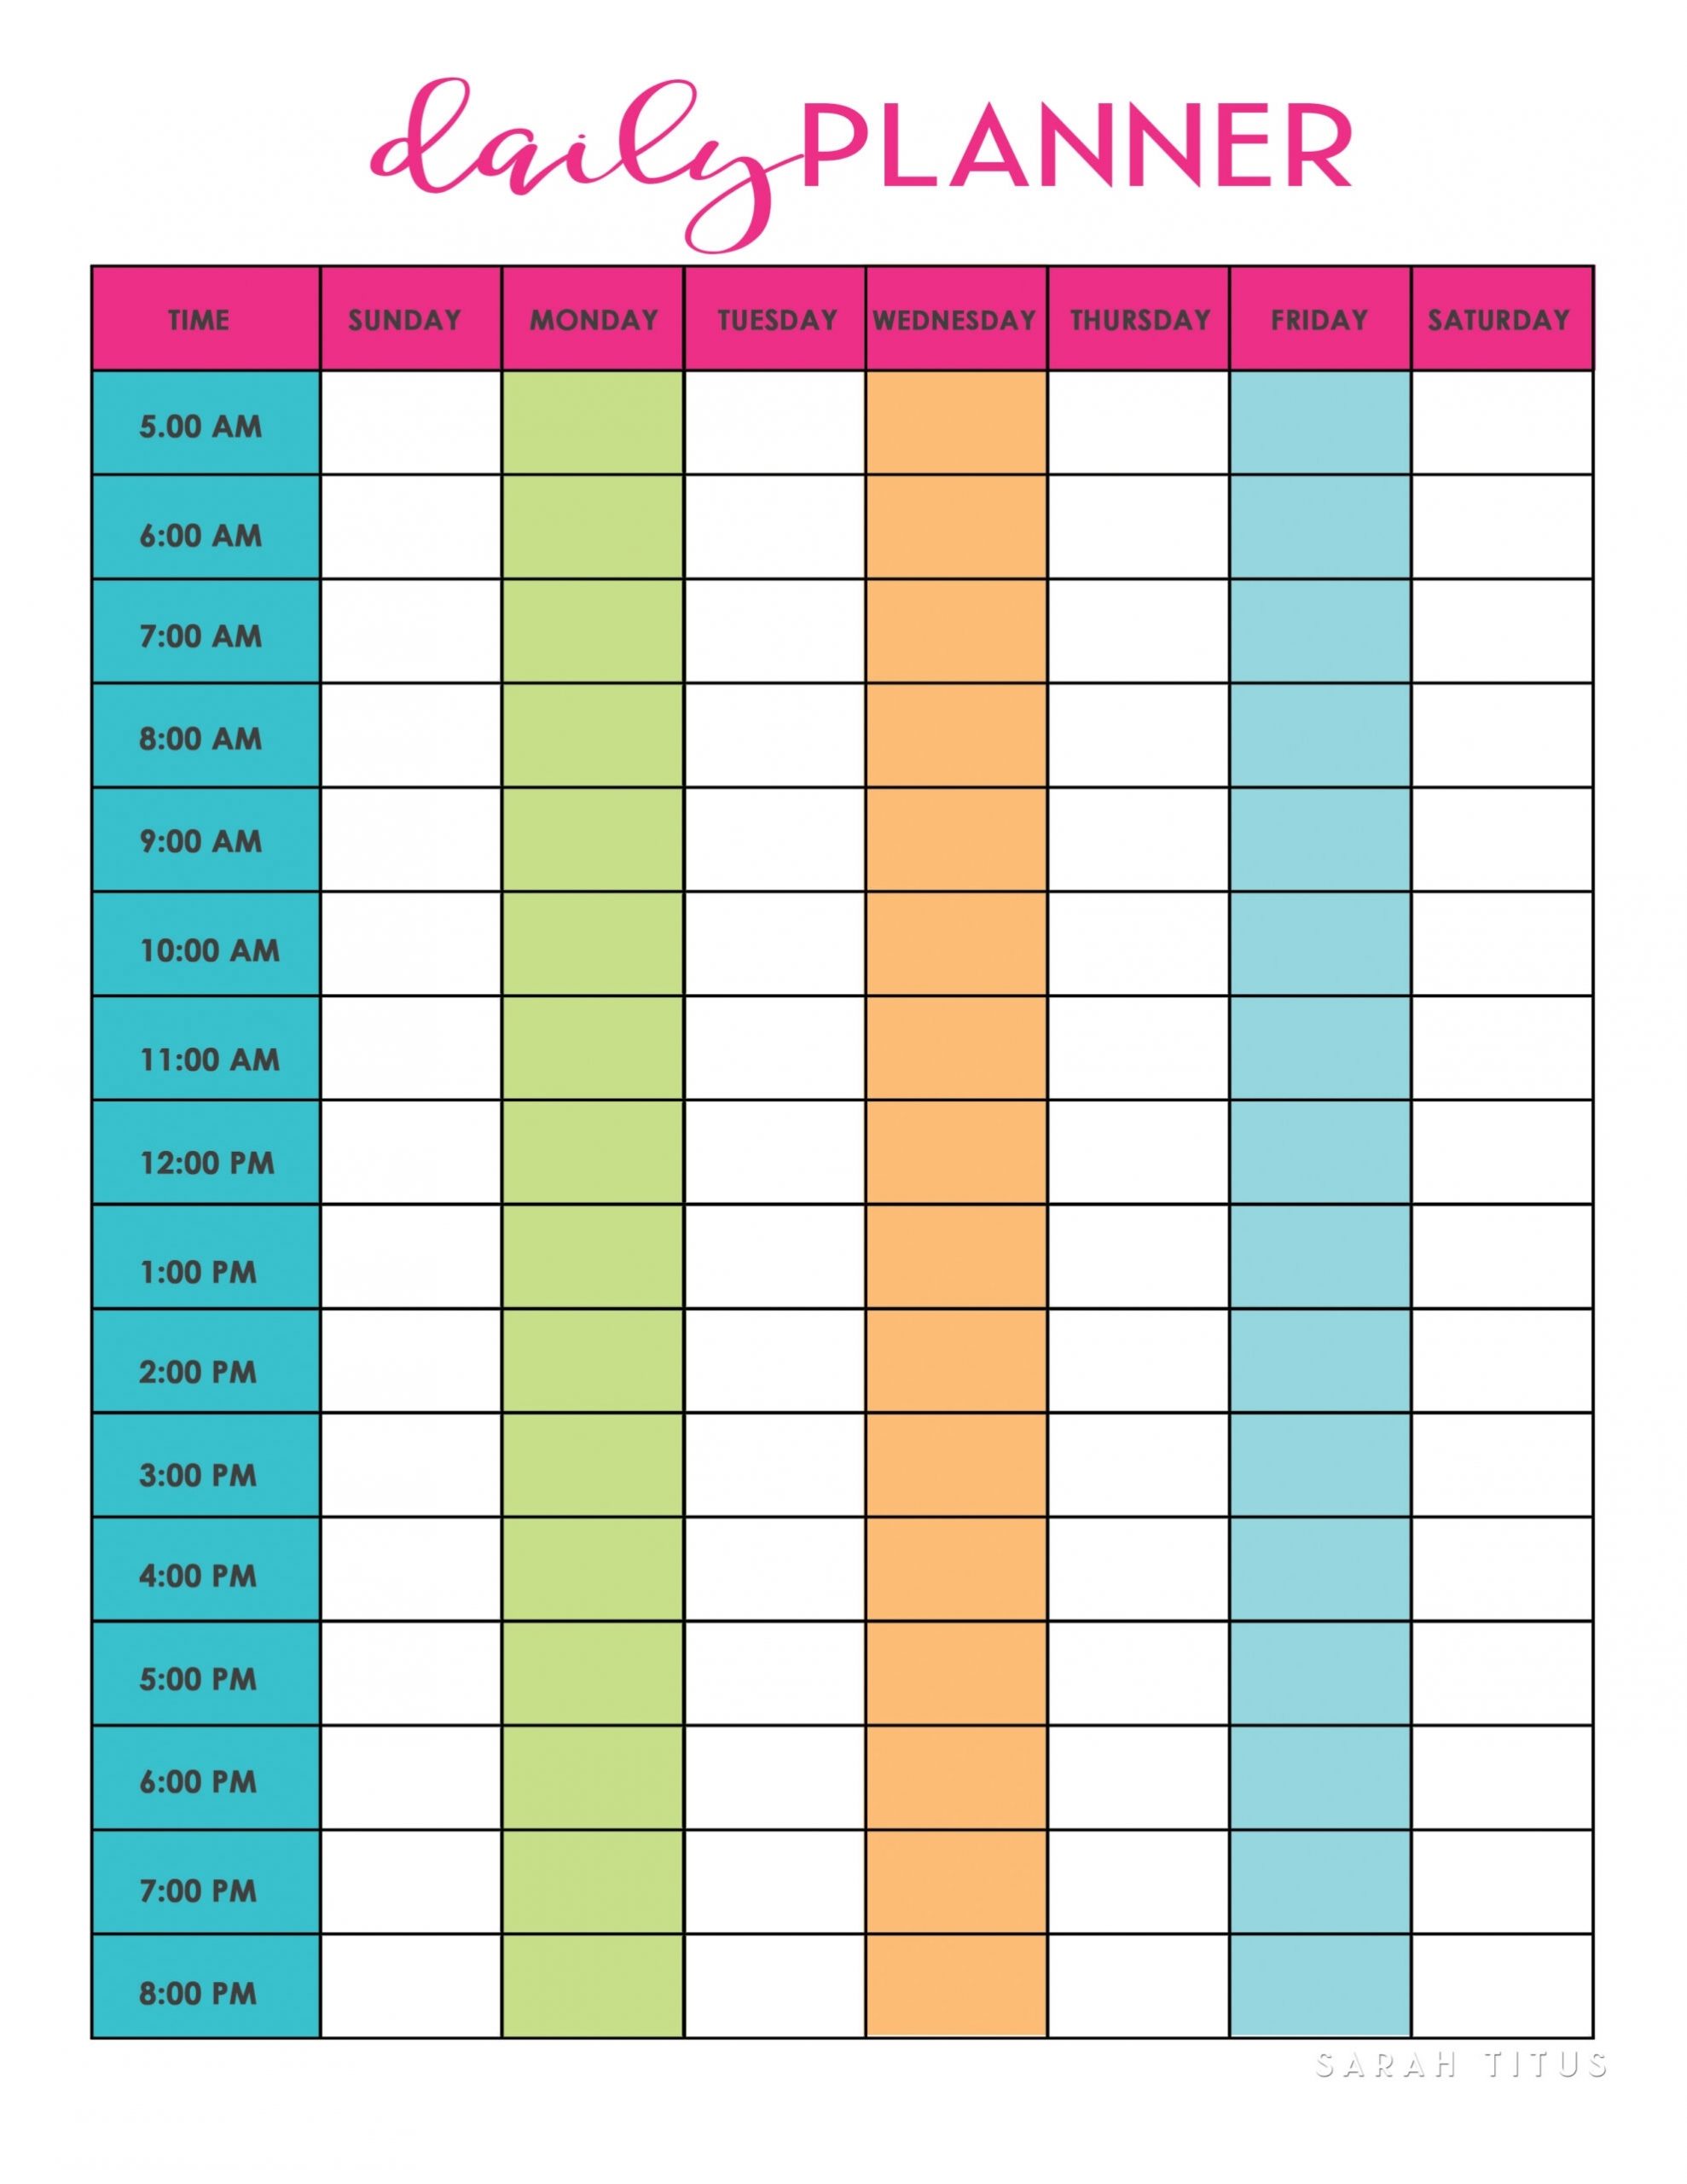 Free Daily Planner Printable - Sarah Titus | From Homeless